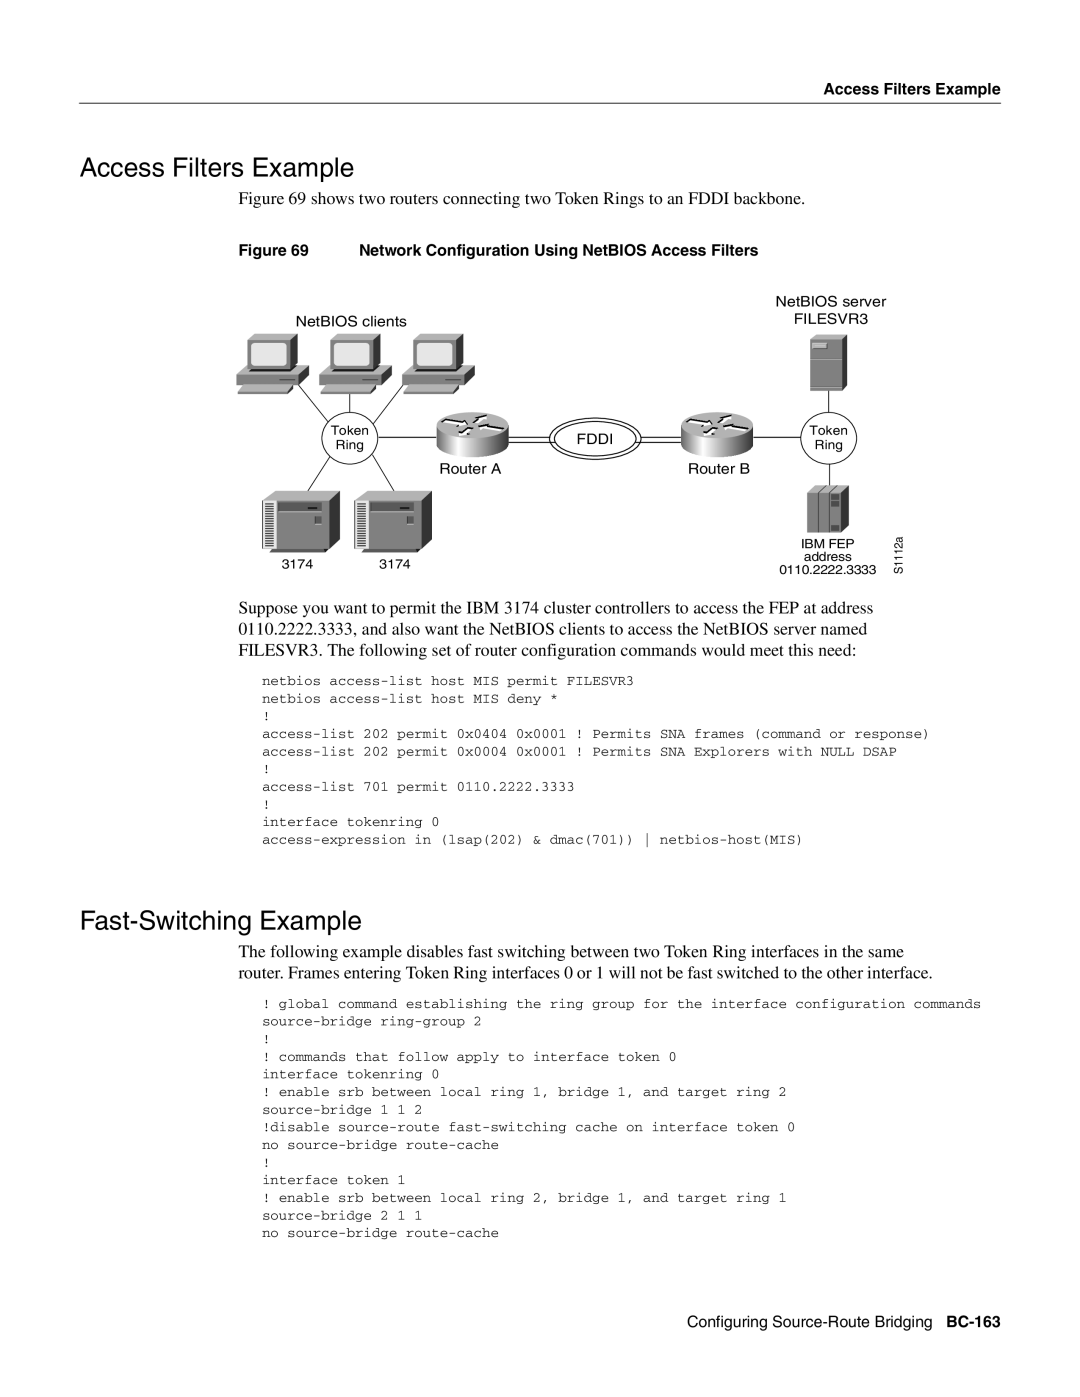 Cisco Systems BC-109 Access Filters Example, Fast-Switching Example, Network Configuration Using NetBIOS Access Filters 